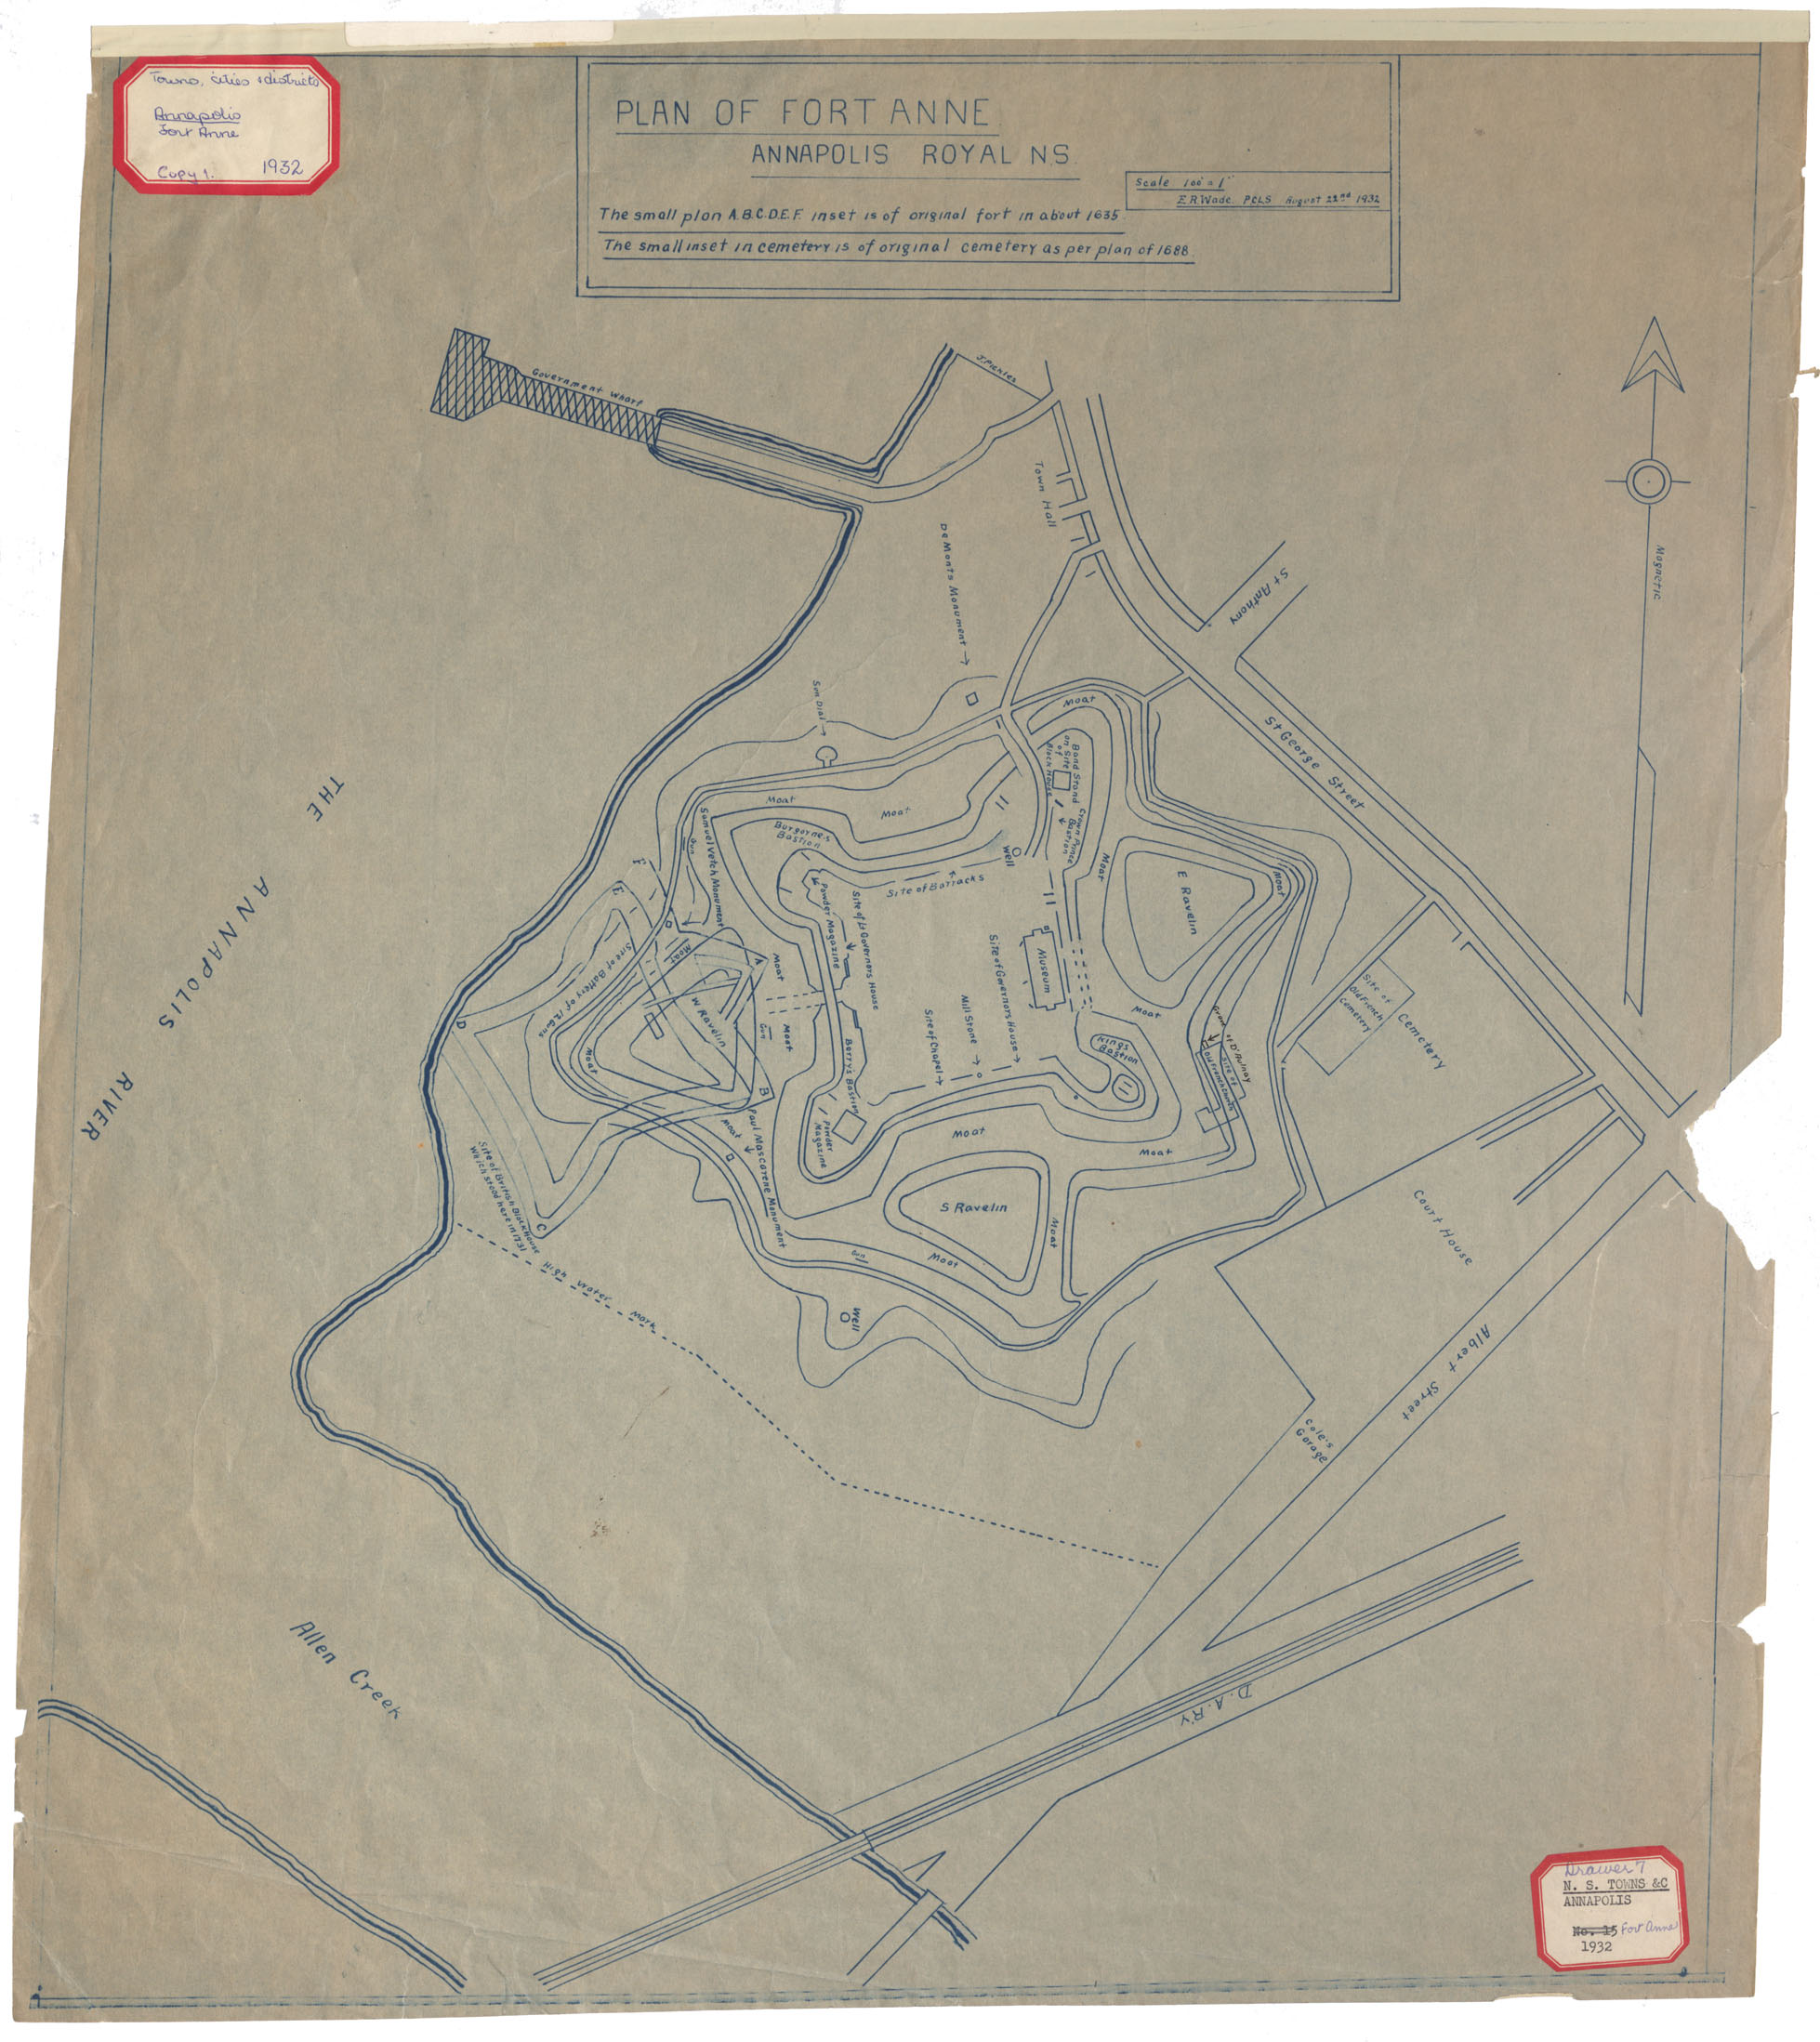 Plan of Fort Anne, Annapolis Royal, NS